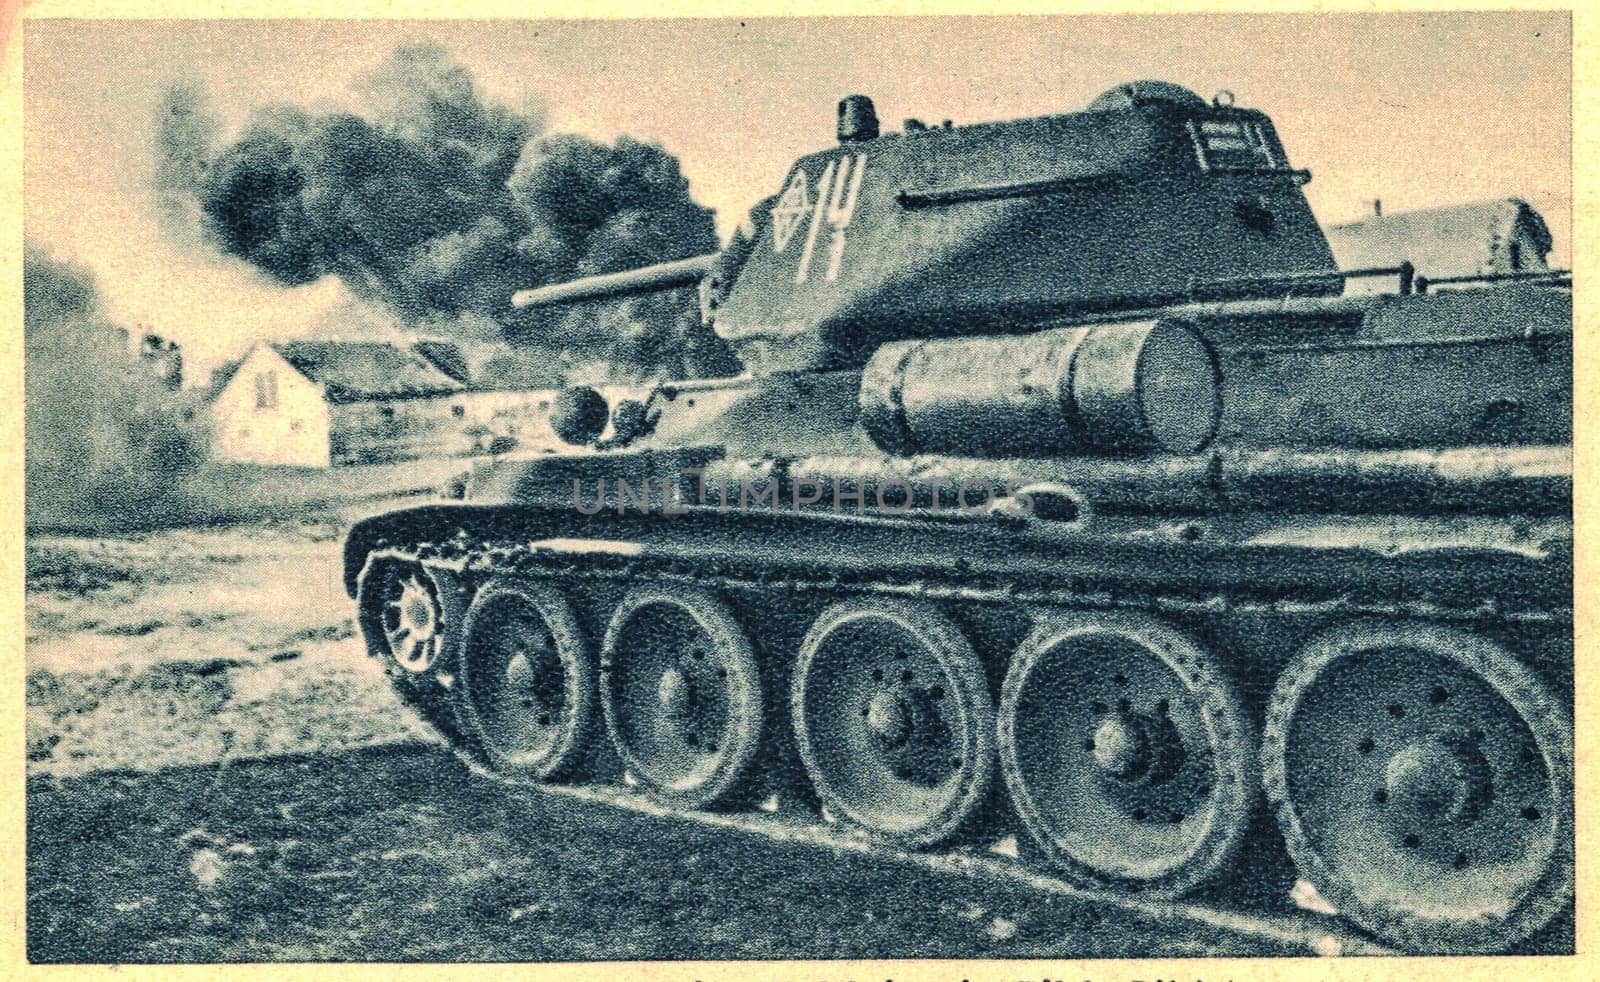 EUROPE - CIRCA 1943: The T-34 is a Soviet medium tank introduced in 1940, famously deployed during World War II against Operation Barbarossa. The T-34 destroys unknown village in Europe.